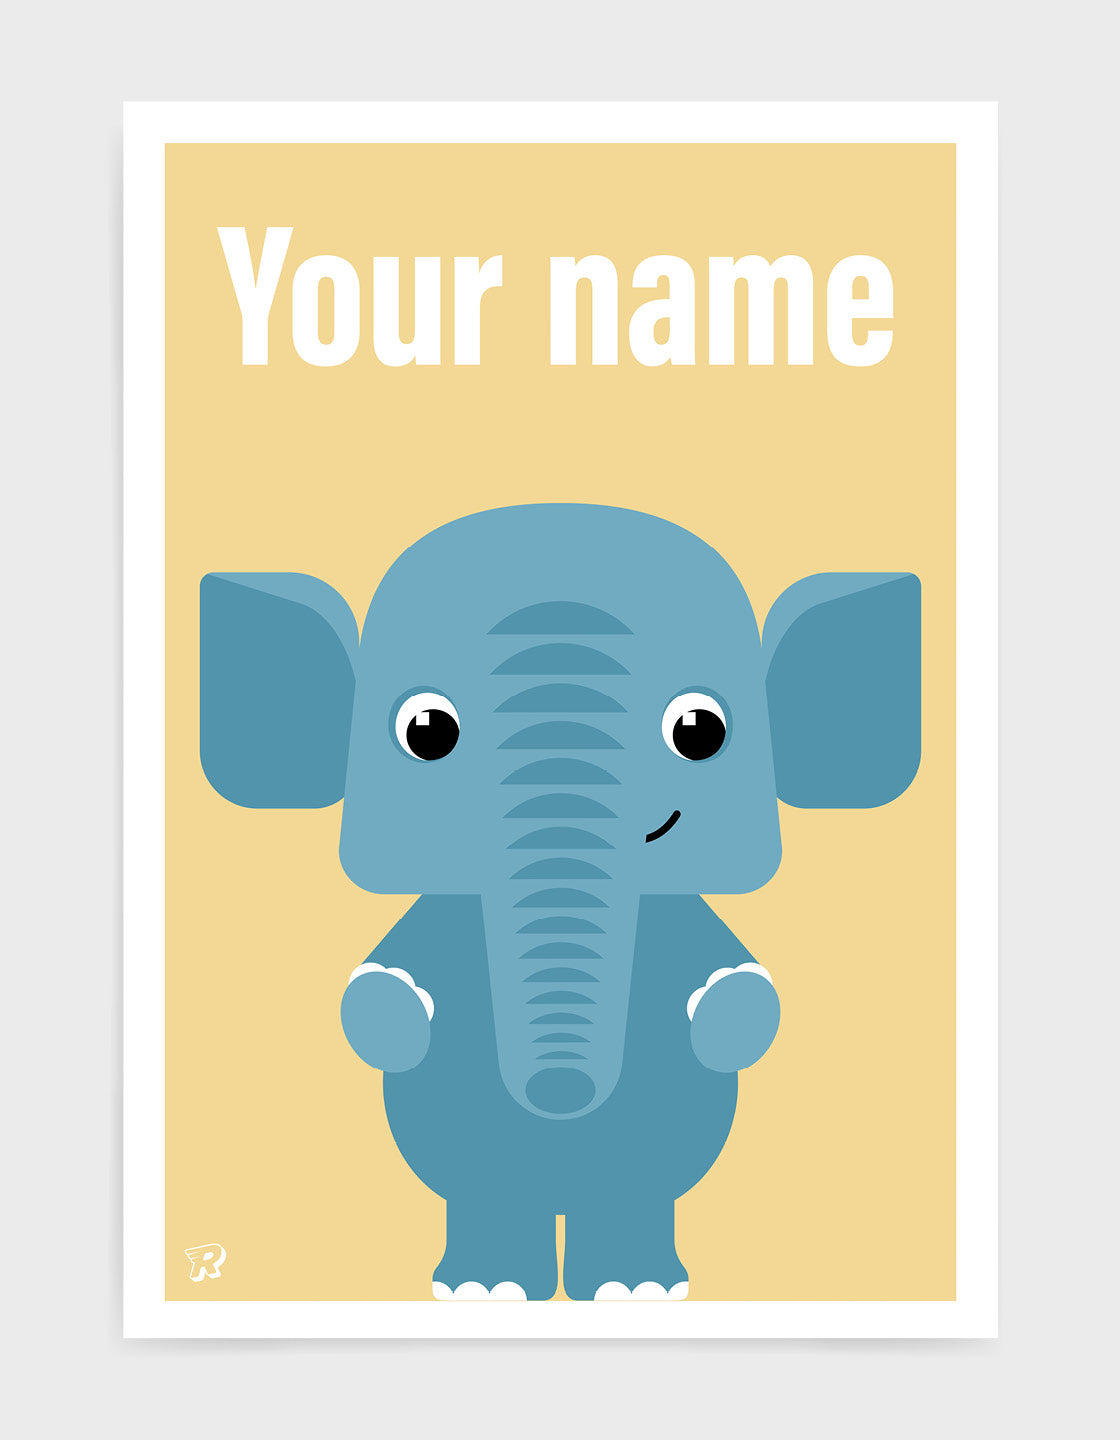 childs art print depicting a cute elephant illustration in blue against a yellow background. The words your name are written above as the picture can be customised